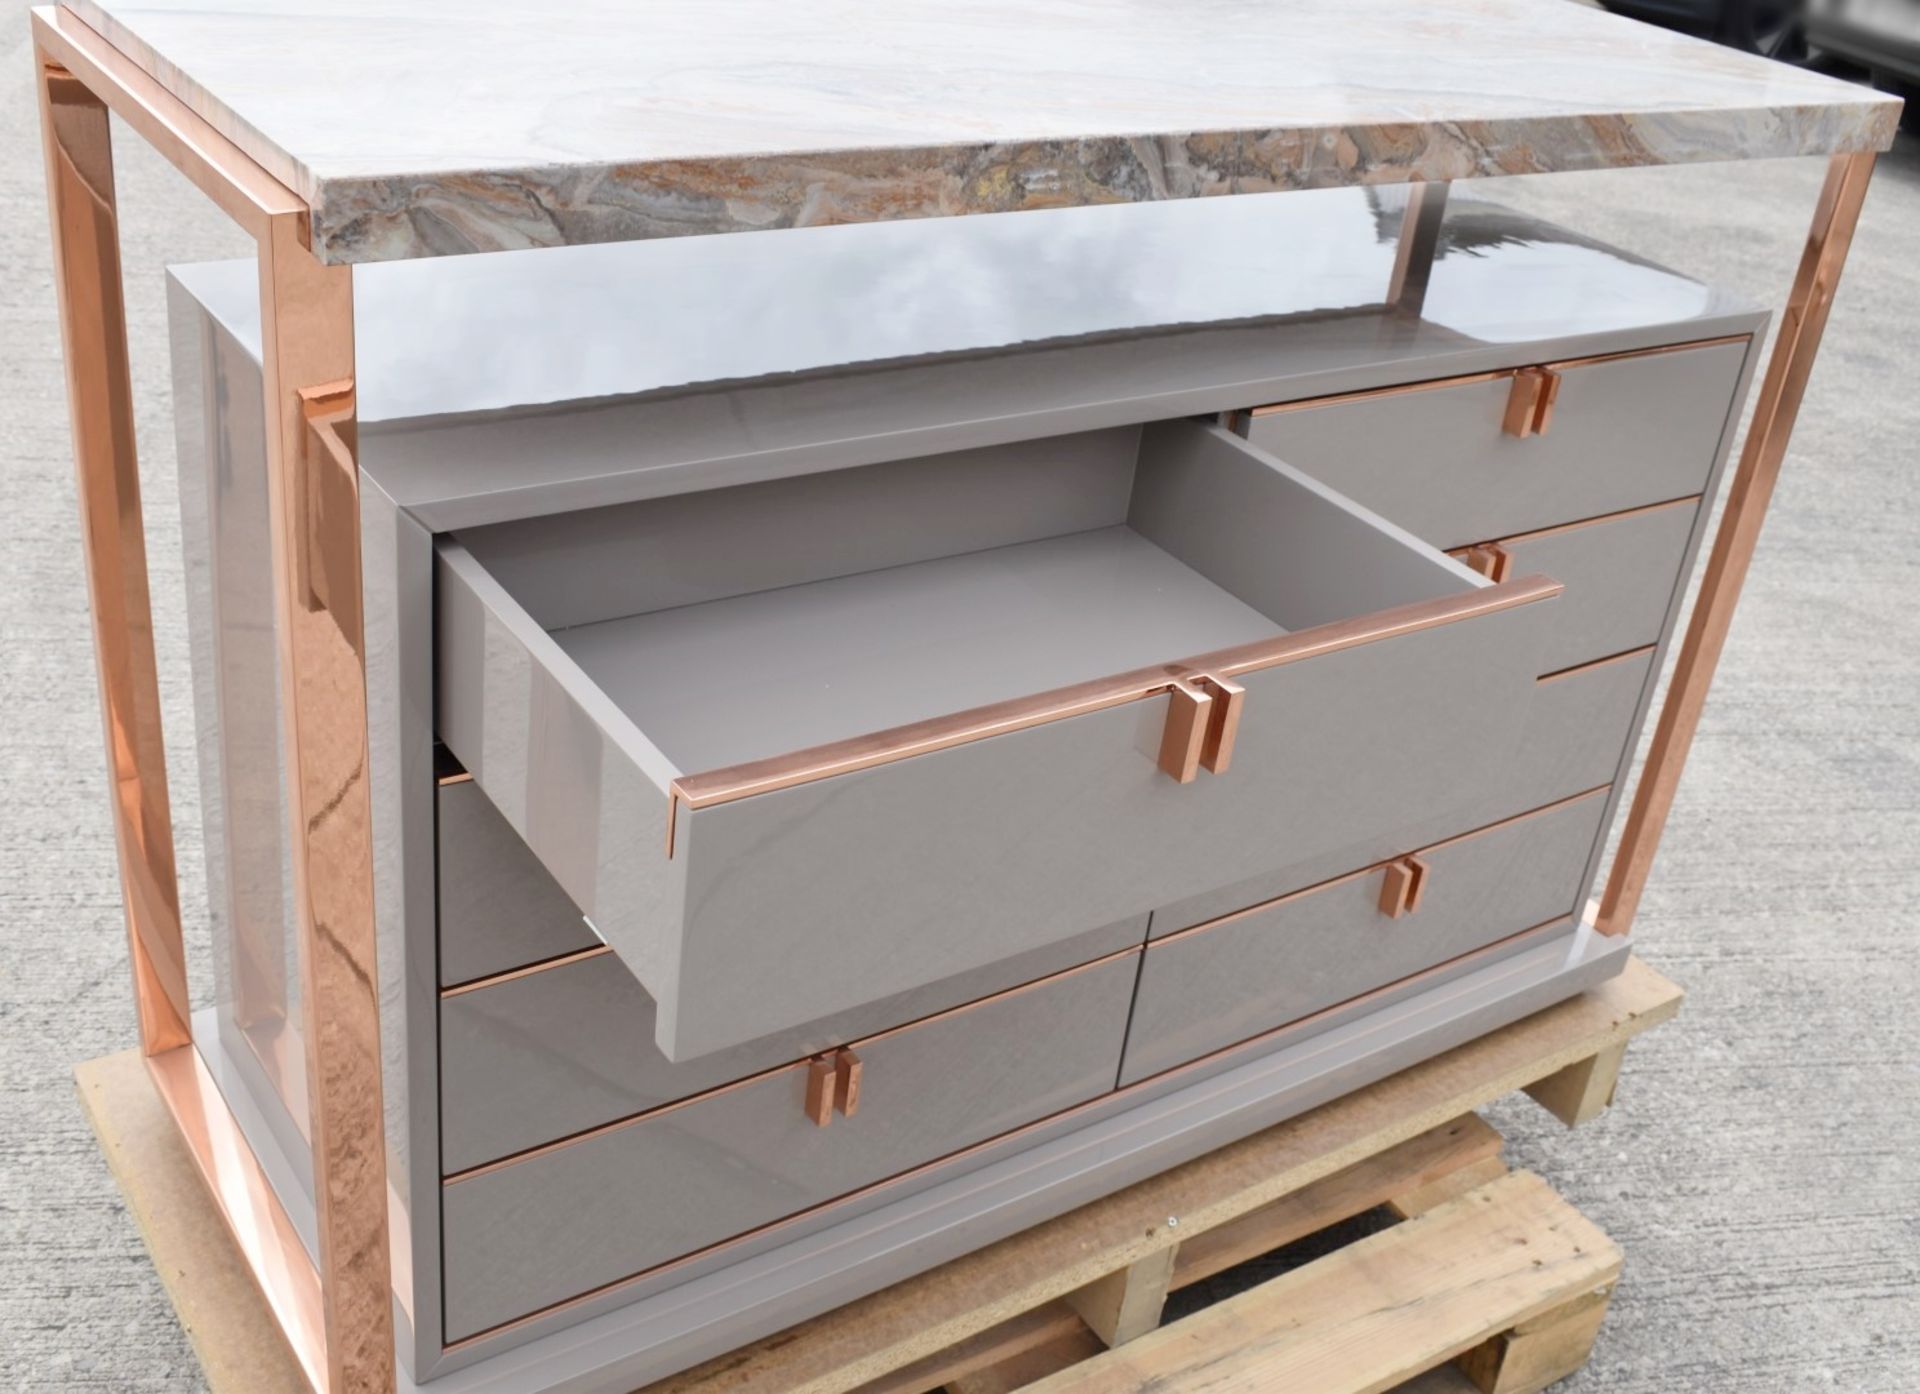 1 x FRATO 'LEXTON' Luxury Custom Ordered Marble Topped Chest of Drawers With Rose Gold Detail - Image 3 of 18